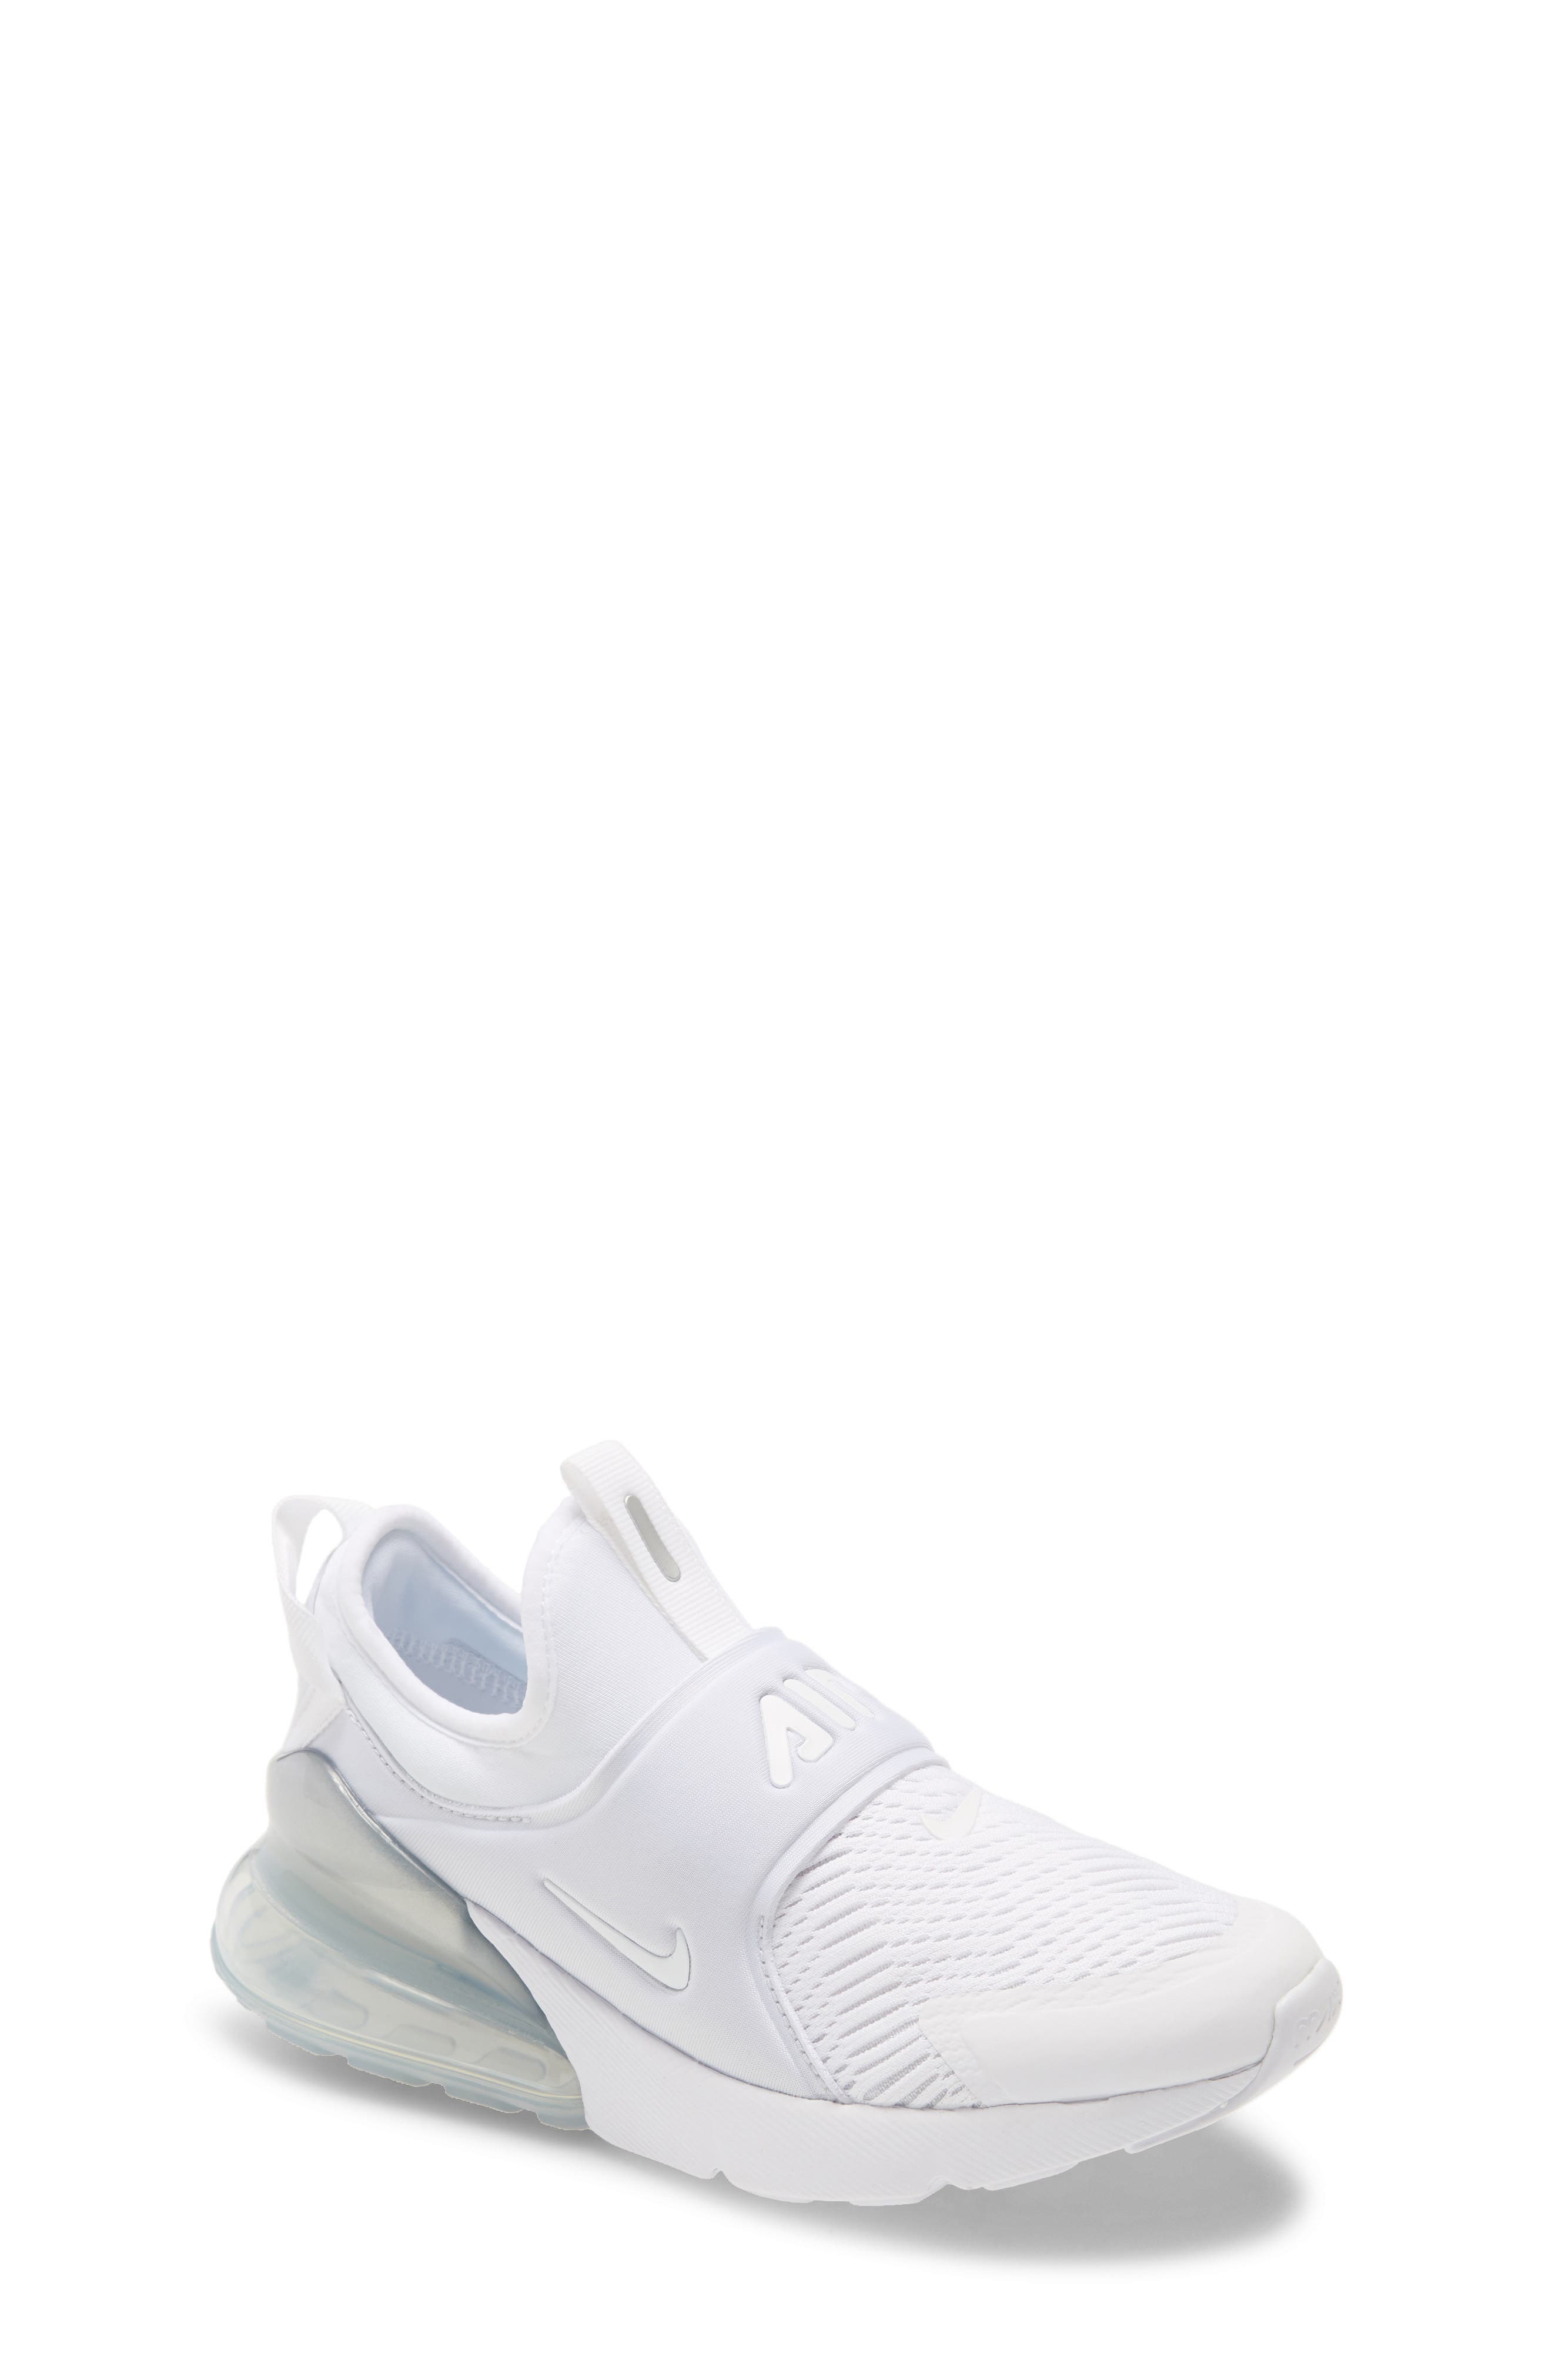 Boys' White Sneakers \u0026 Athletic Shoes